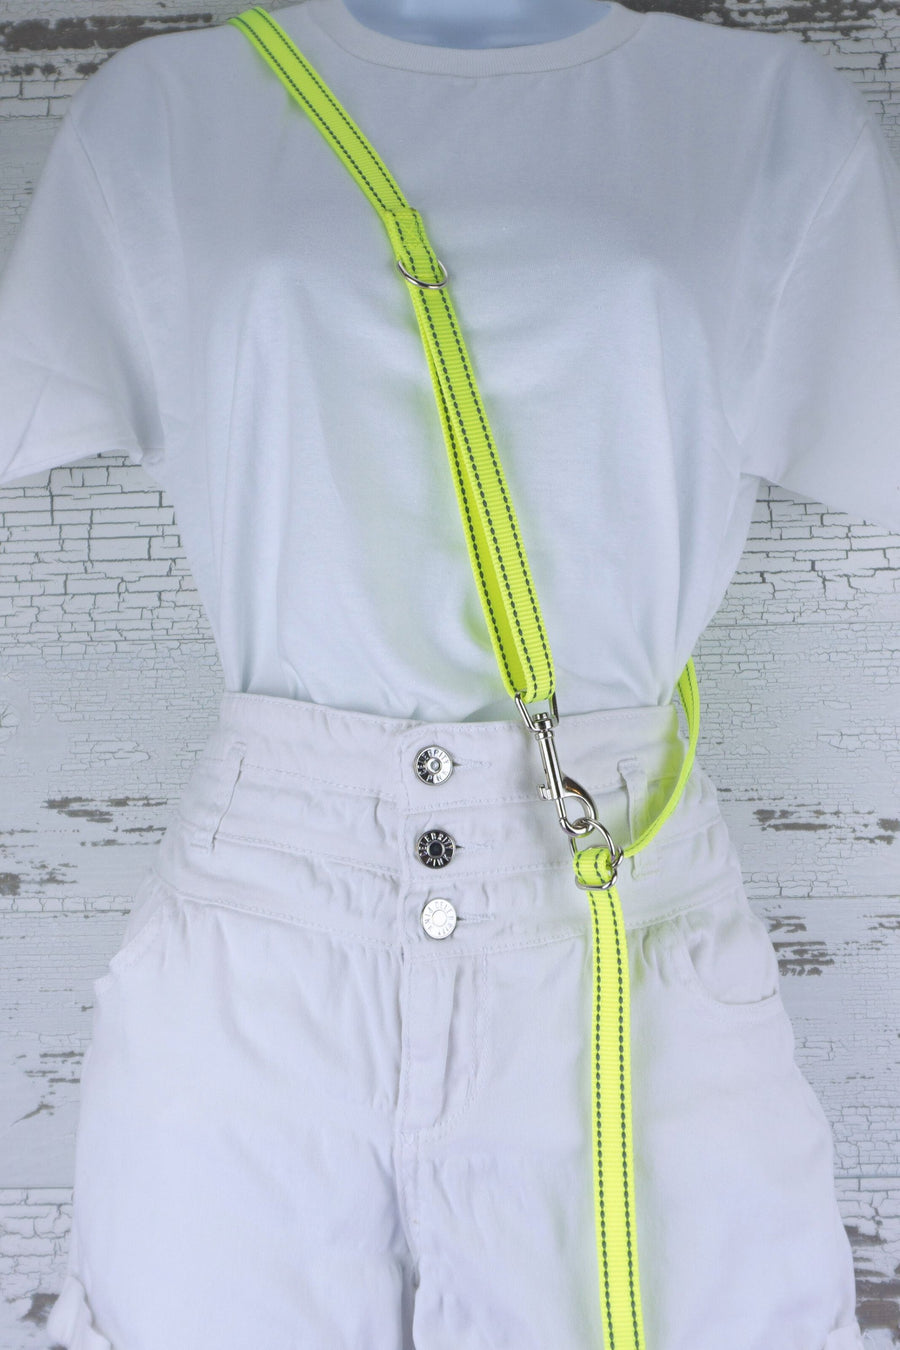 Three way adjustable and convertible leash for small dogs is shown in the cross body configuration, made in a reflective neon yellow webbing.